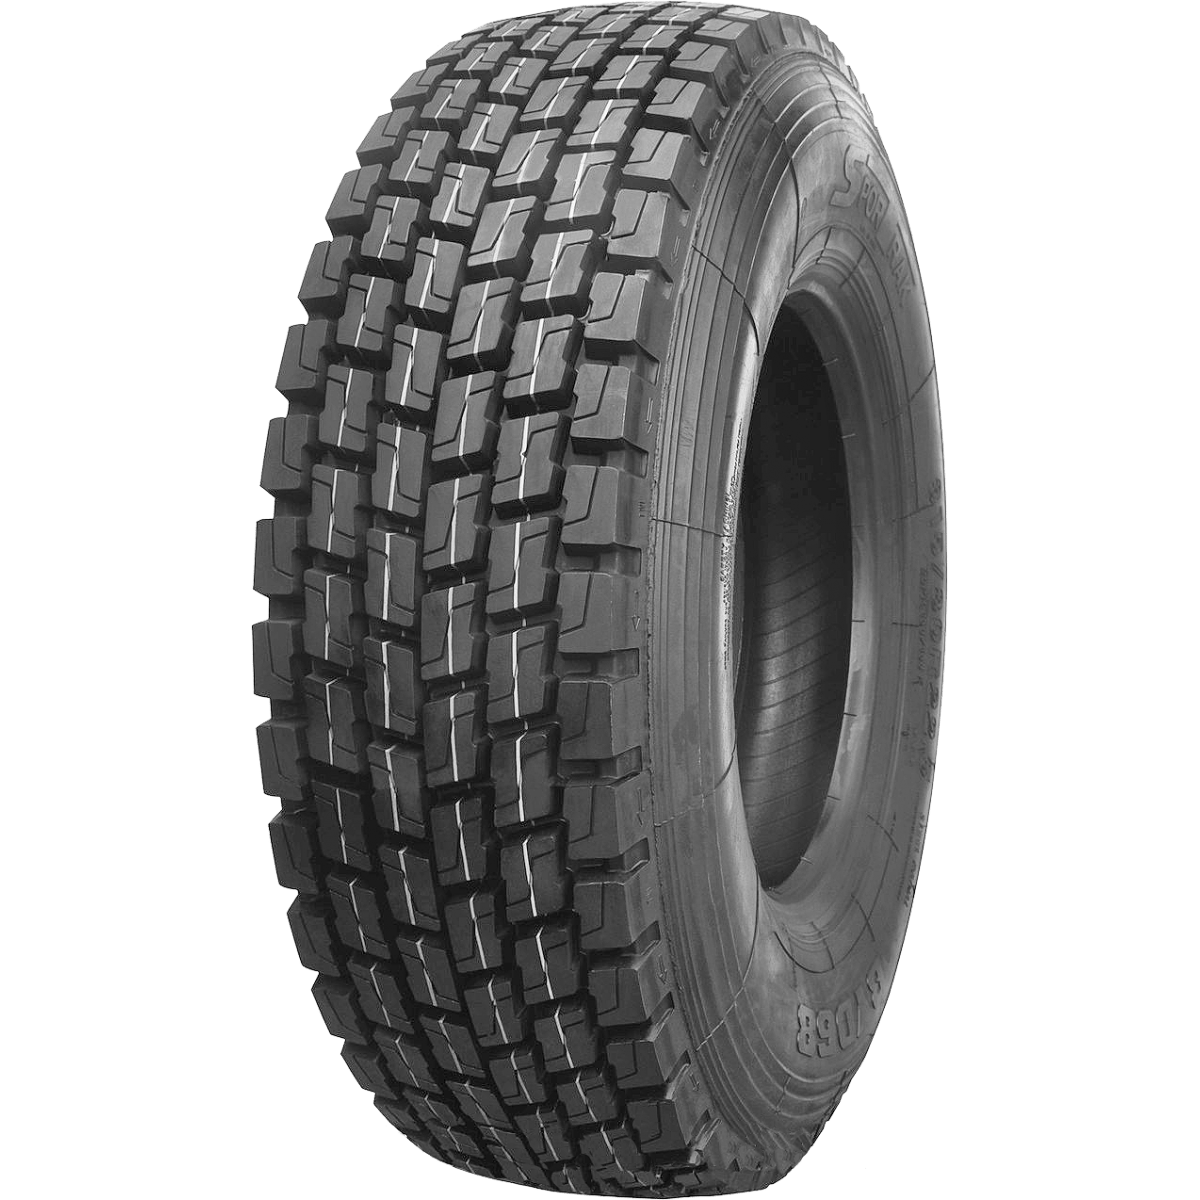 315/70r22.5 Normaks nd638. 315/80r22.5 Normaks nd638. А/шина 22.5 315/80r22.5 Normaks nd638 (ведущая). 315/80r22.5 Normaks nd768. Купить ведущие резину 22.5